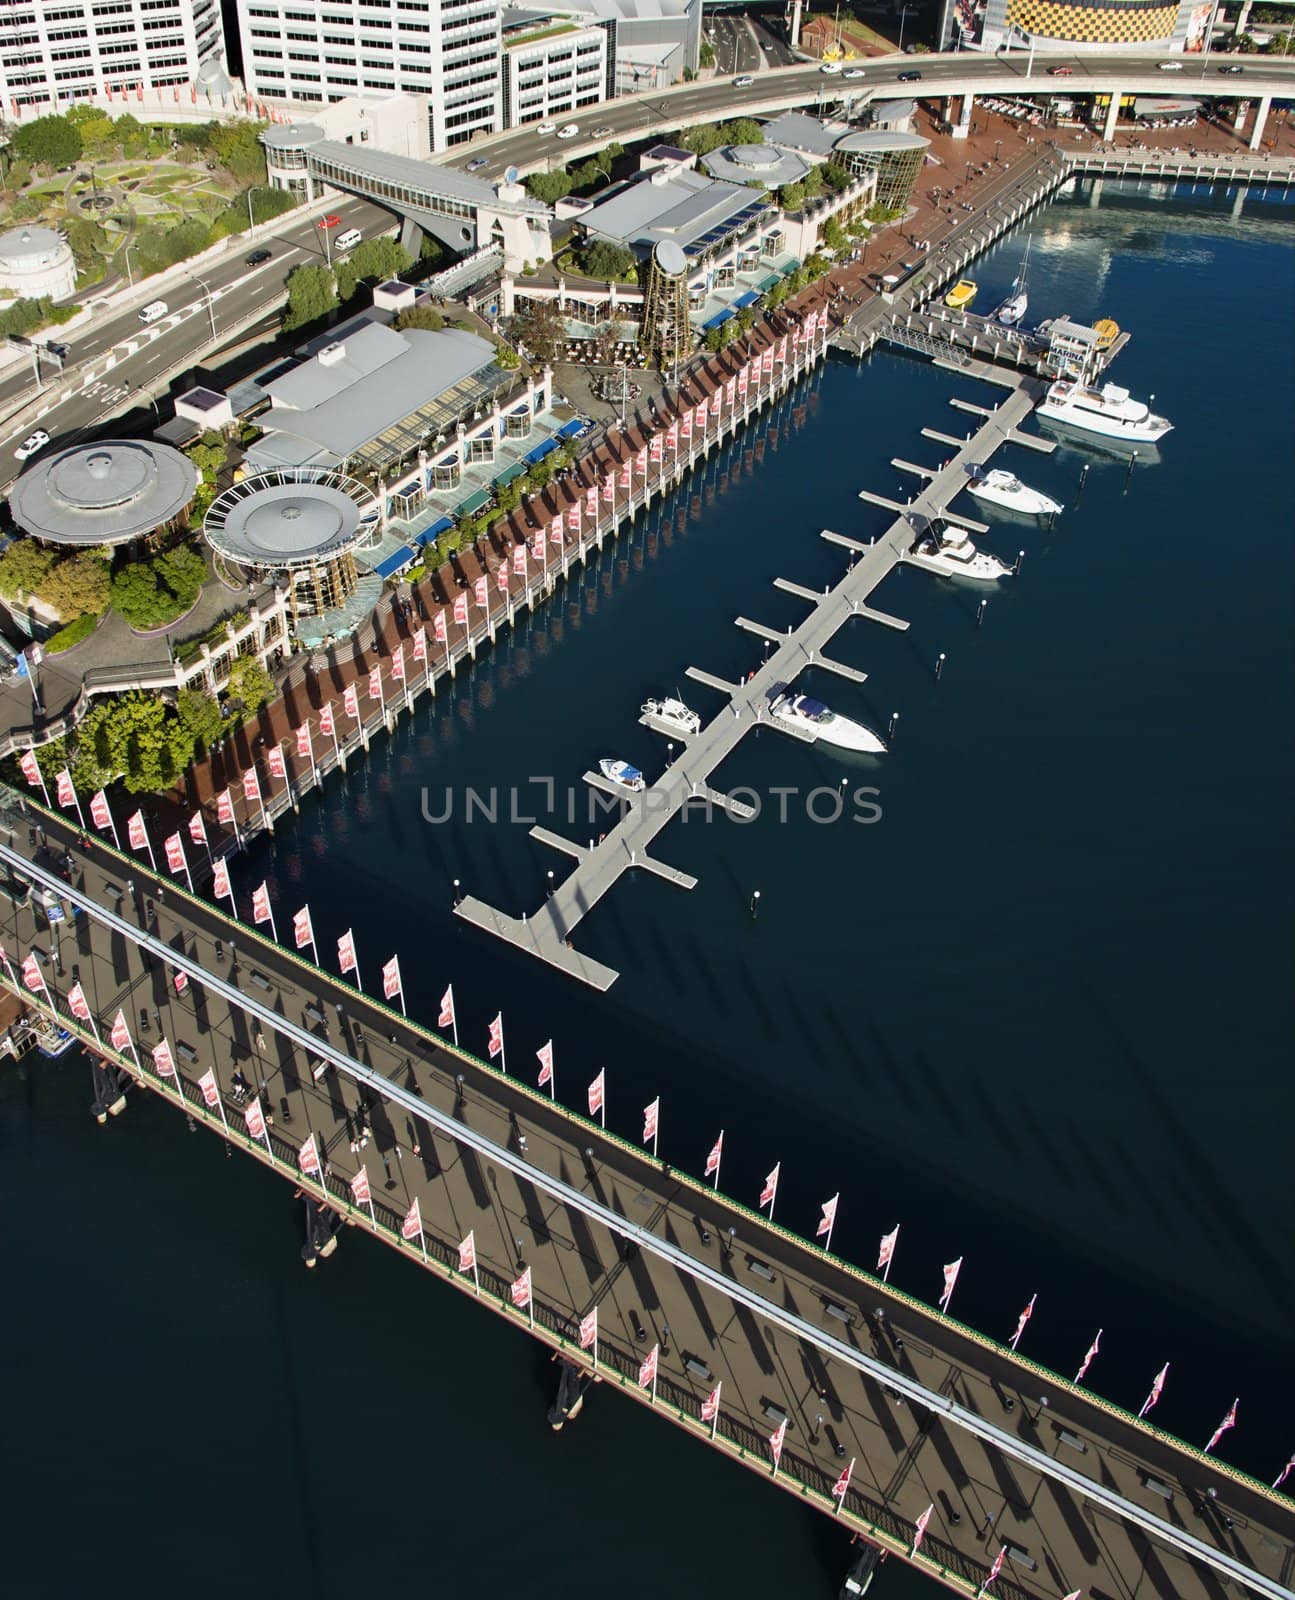 Aerial view of Pyrmont Bridge andboats in Darling Harbour, Sydney, Australia.